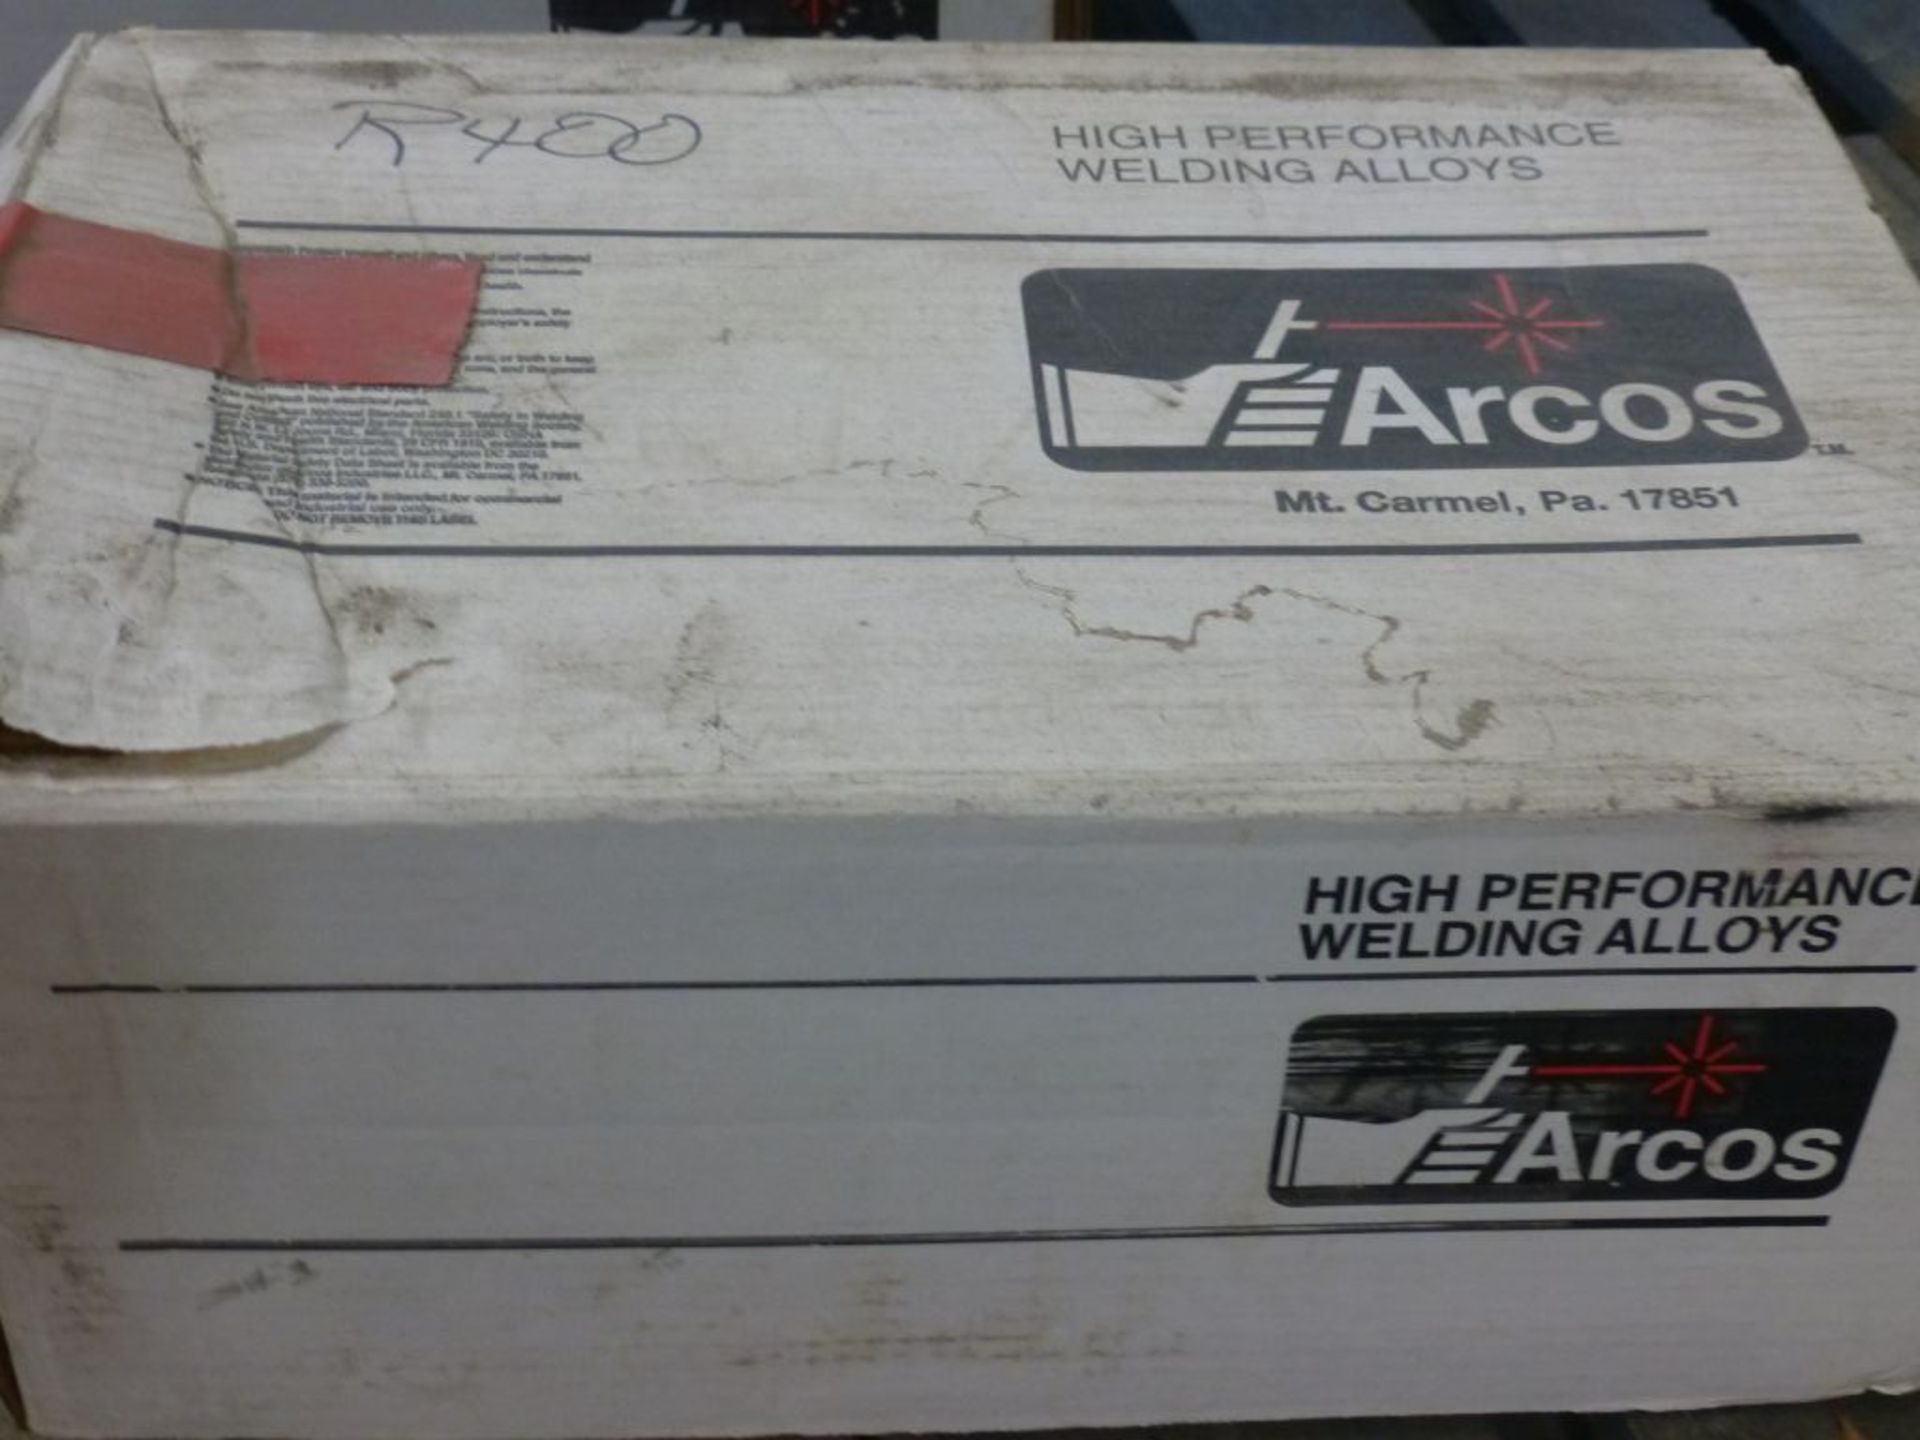 Lot of (1) Box of Arcos 1/8" Welding Electrodes|Part No. CLN738H; Model No. R400; 50 lbs - Image 2 of 3